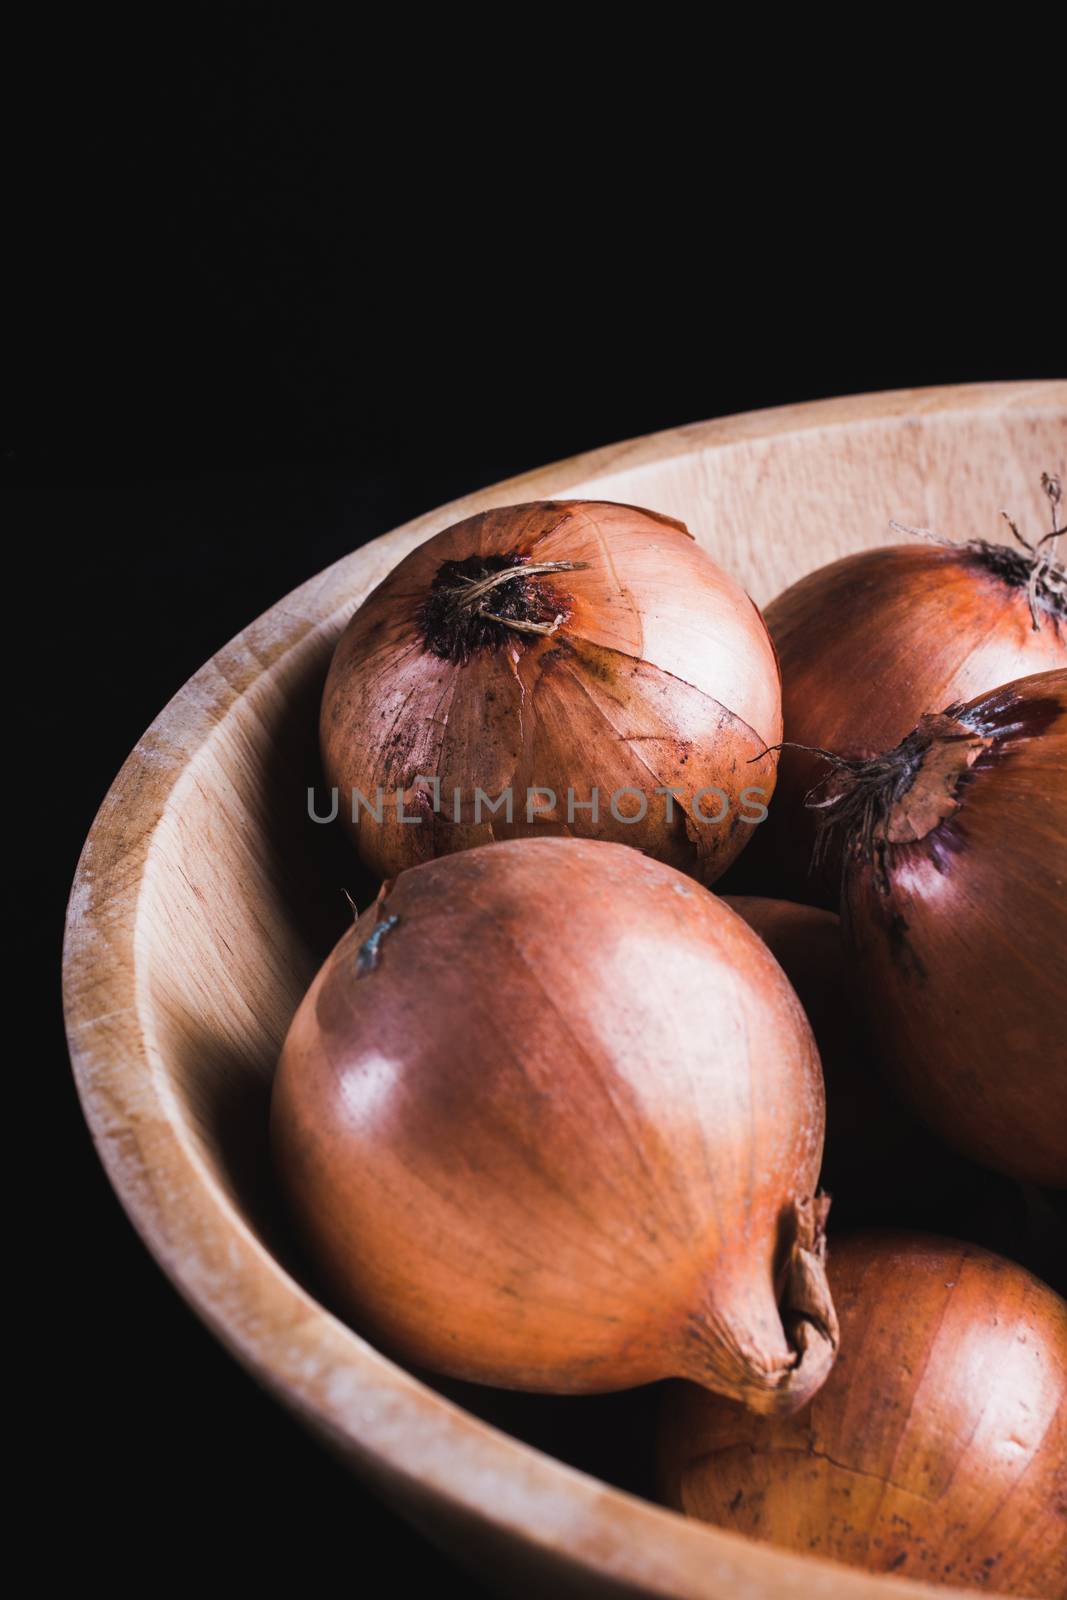 raw onions in a wooden bowl, black background